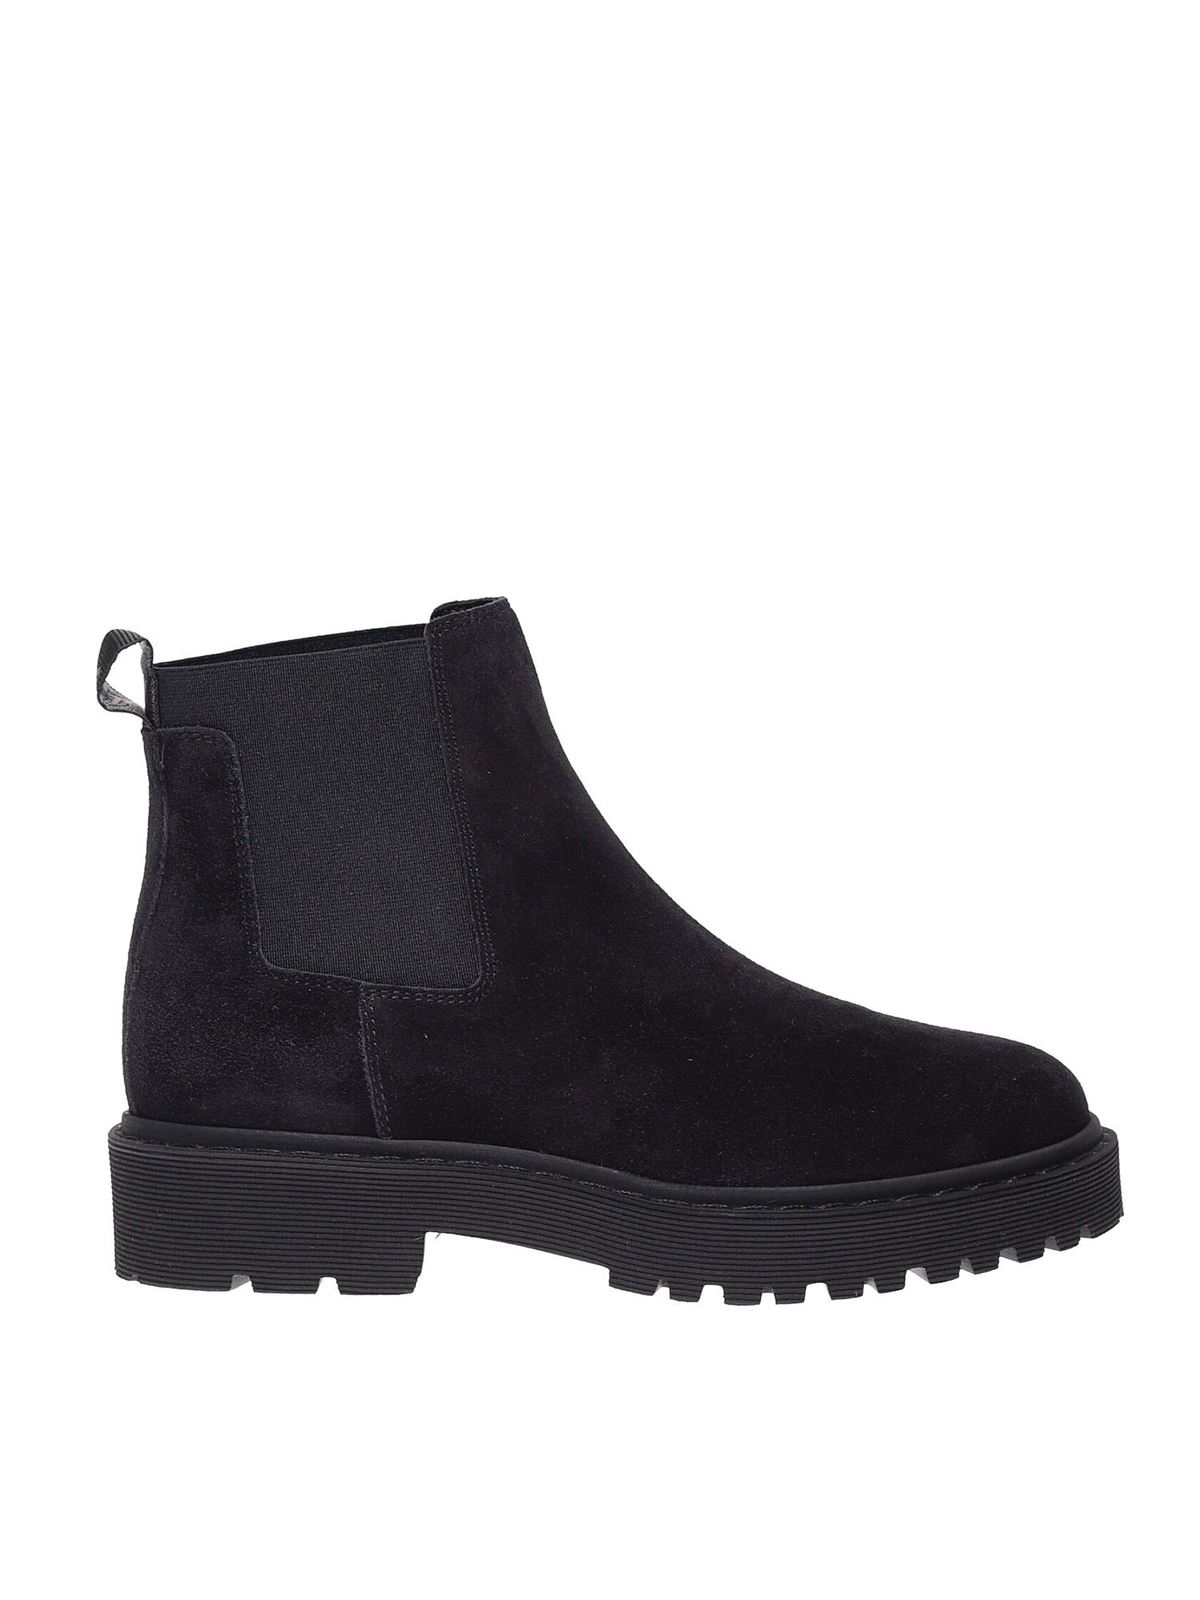 Ankle boots Hogan - Chelsea BootS in black - HXW5430DG80BYEB999